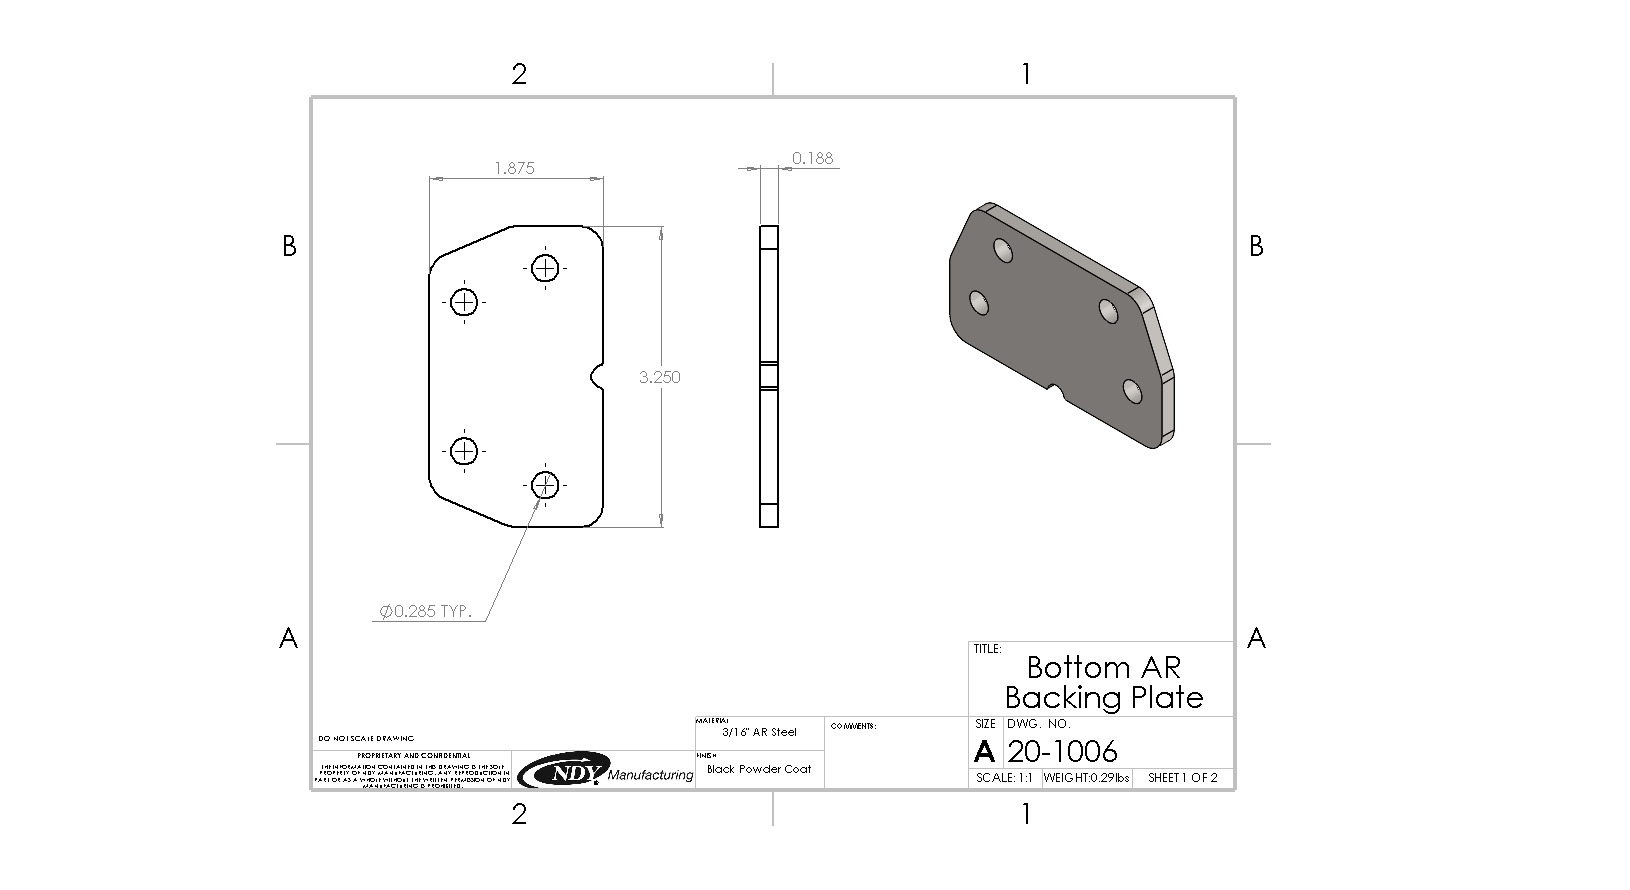 A drawing of a Stalk Stomper Bottom AR Backing Plate for a door.